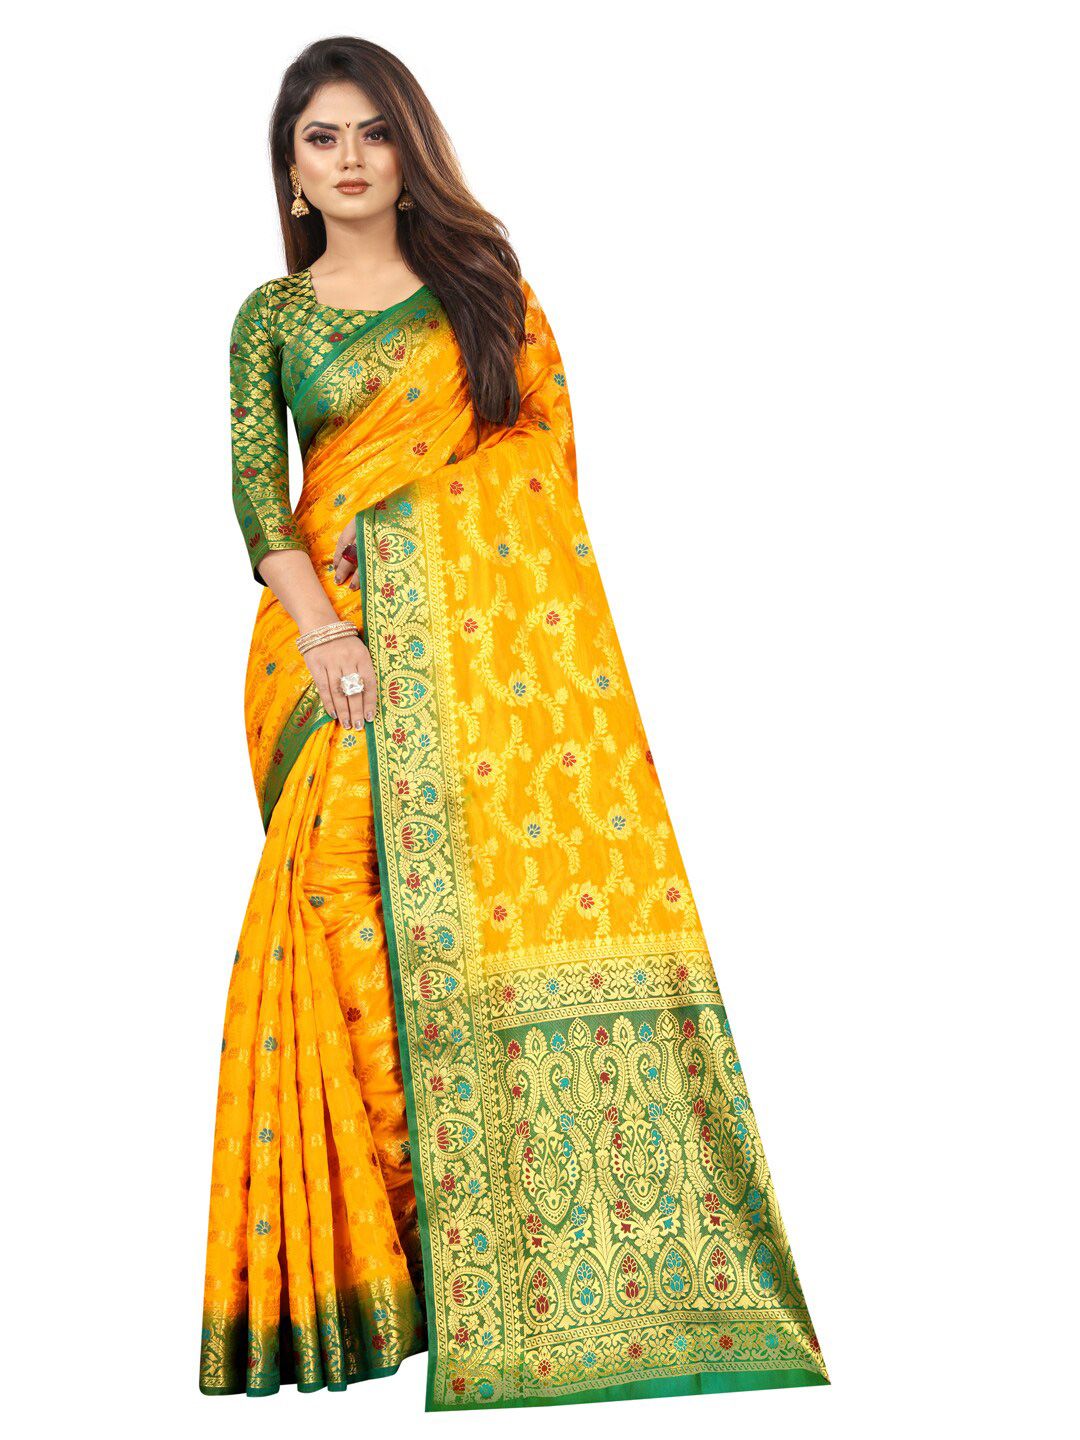 PERFECT WEAR Green & Yellow Floral Silk Cotton Saree Price in India